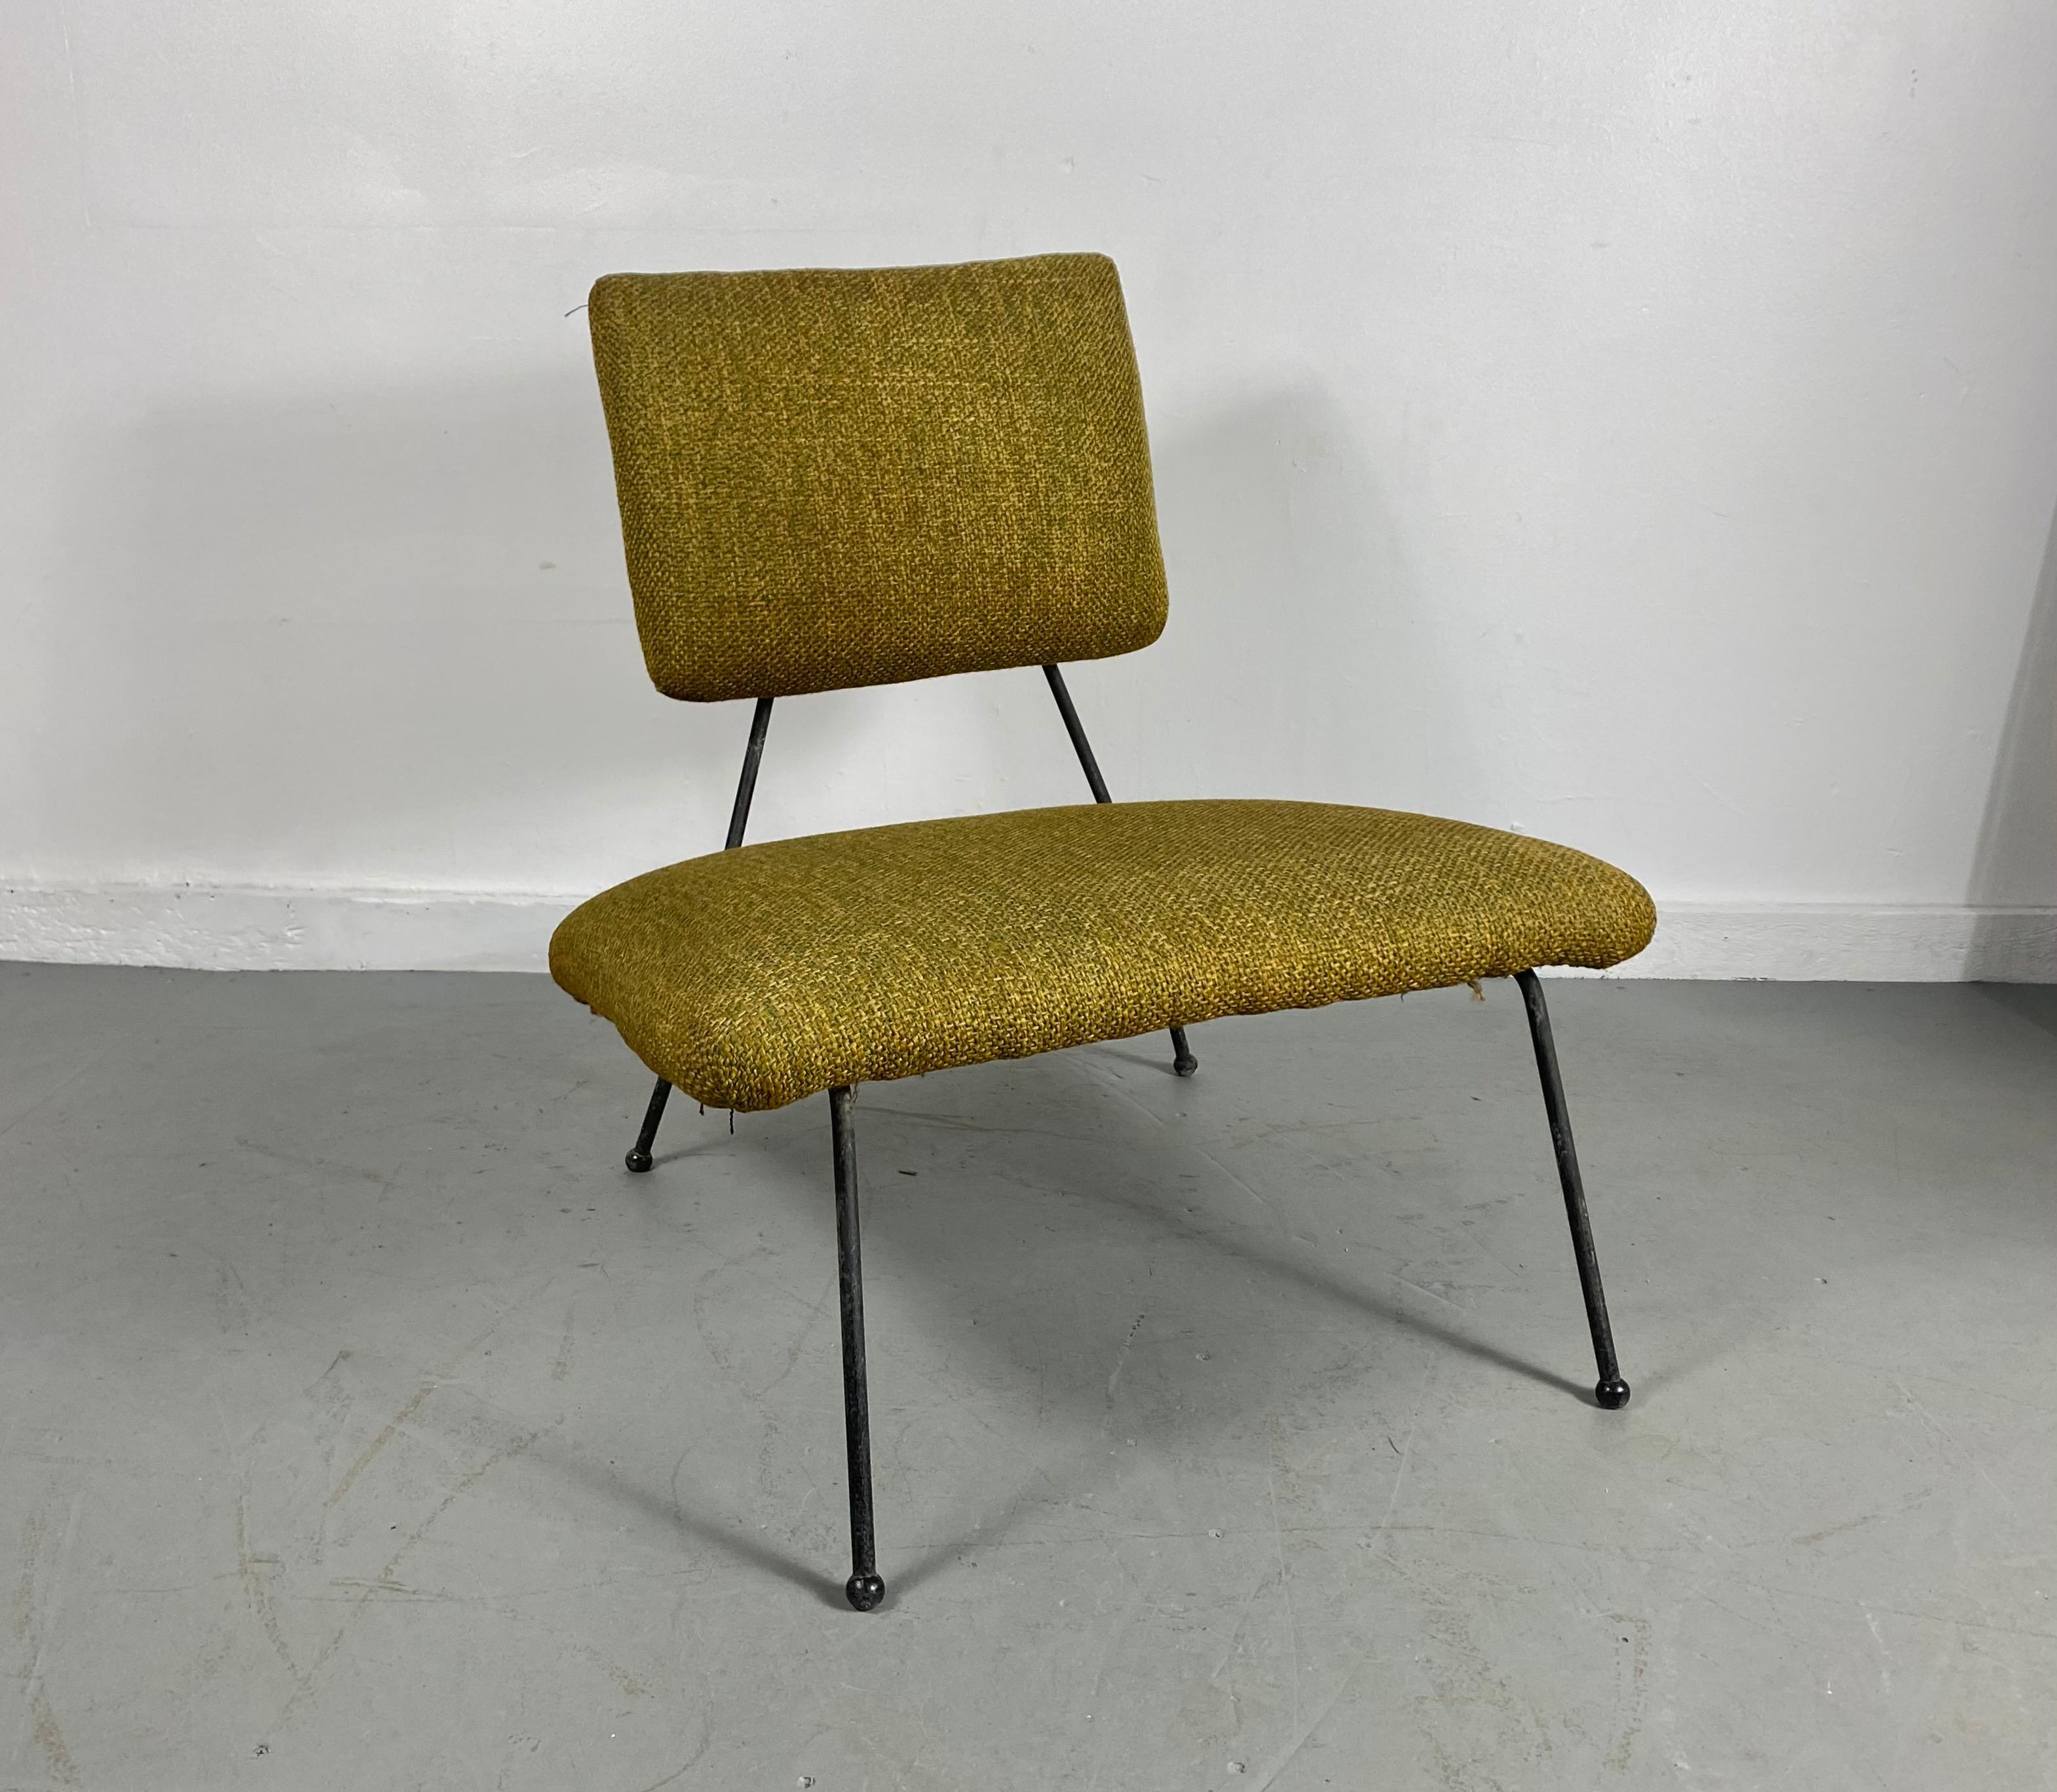 American Modernist Iron Adrian Pearsall for Craft Associates Arm-Less Lounge Chair